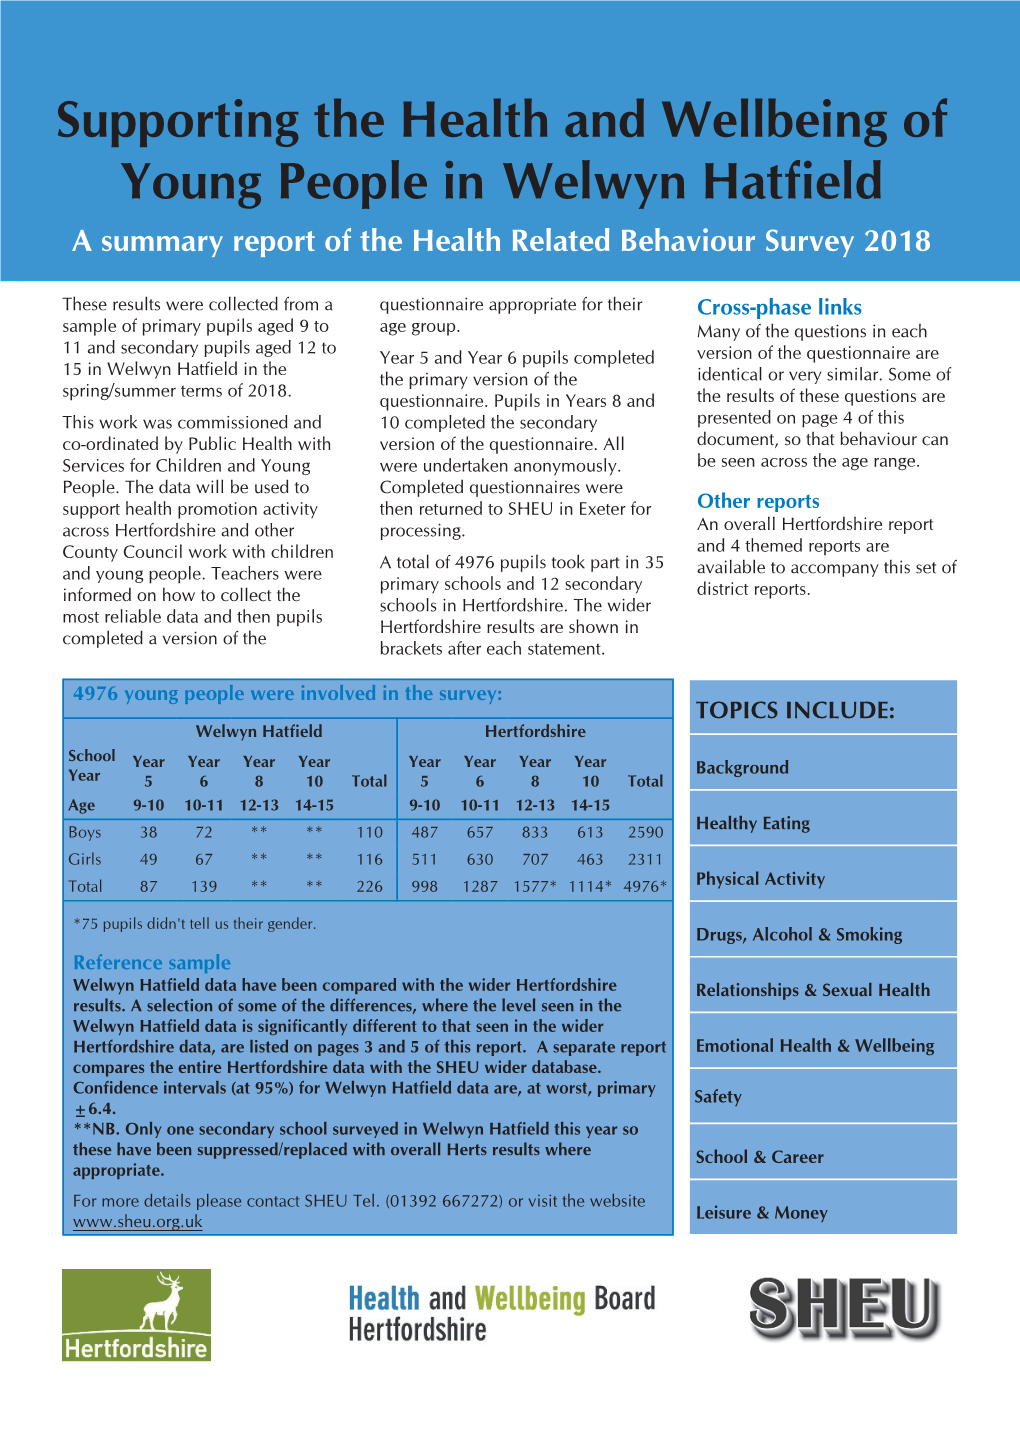 Welwyn Hatfield a Summary Report of the Health Related Behaviour Survey 2018